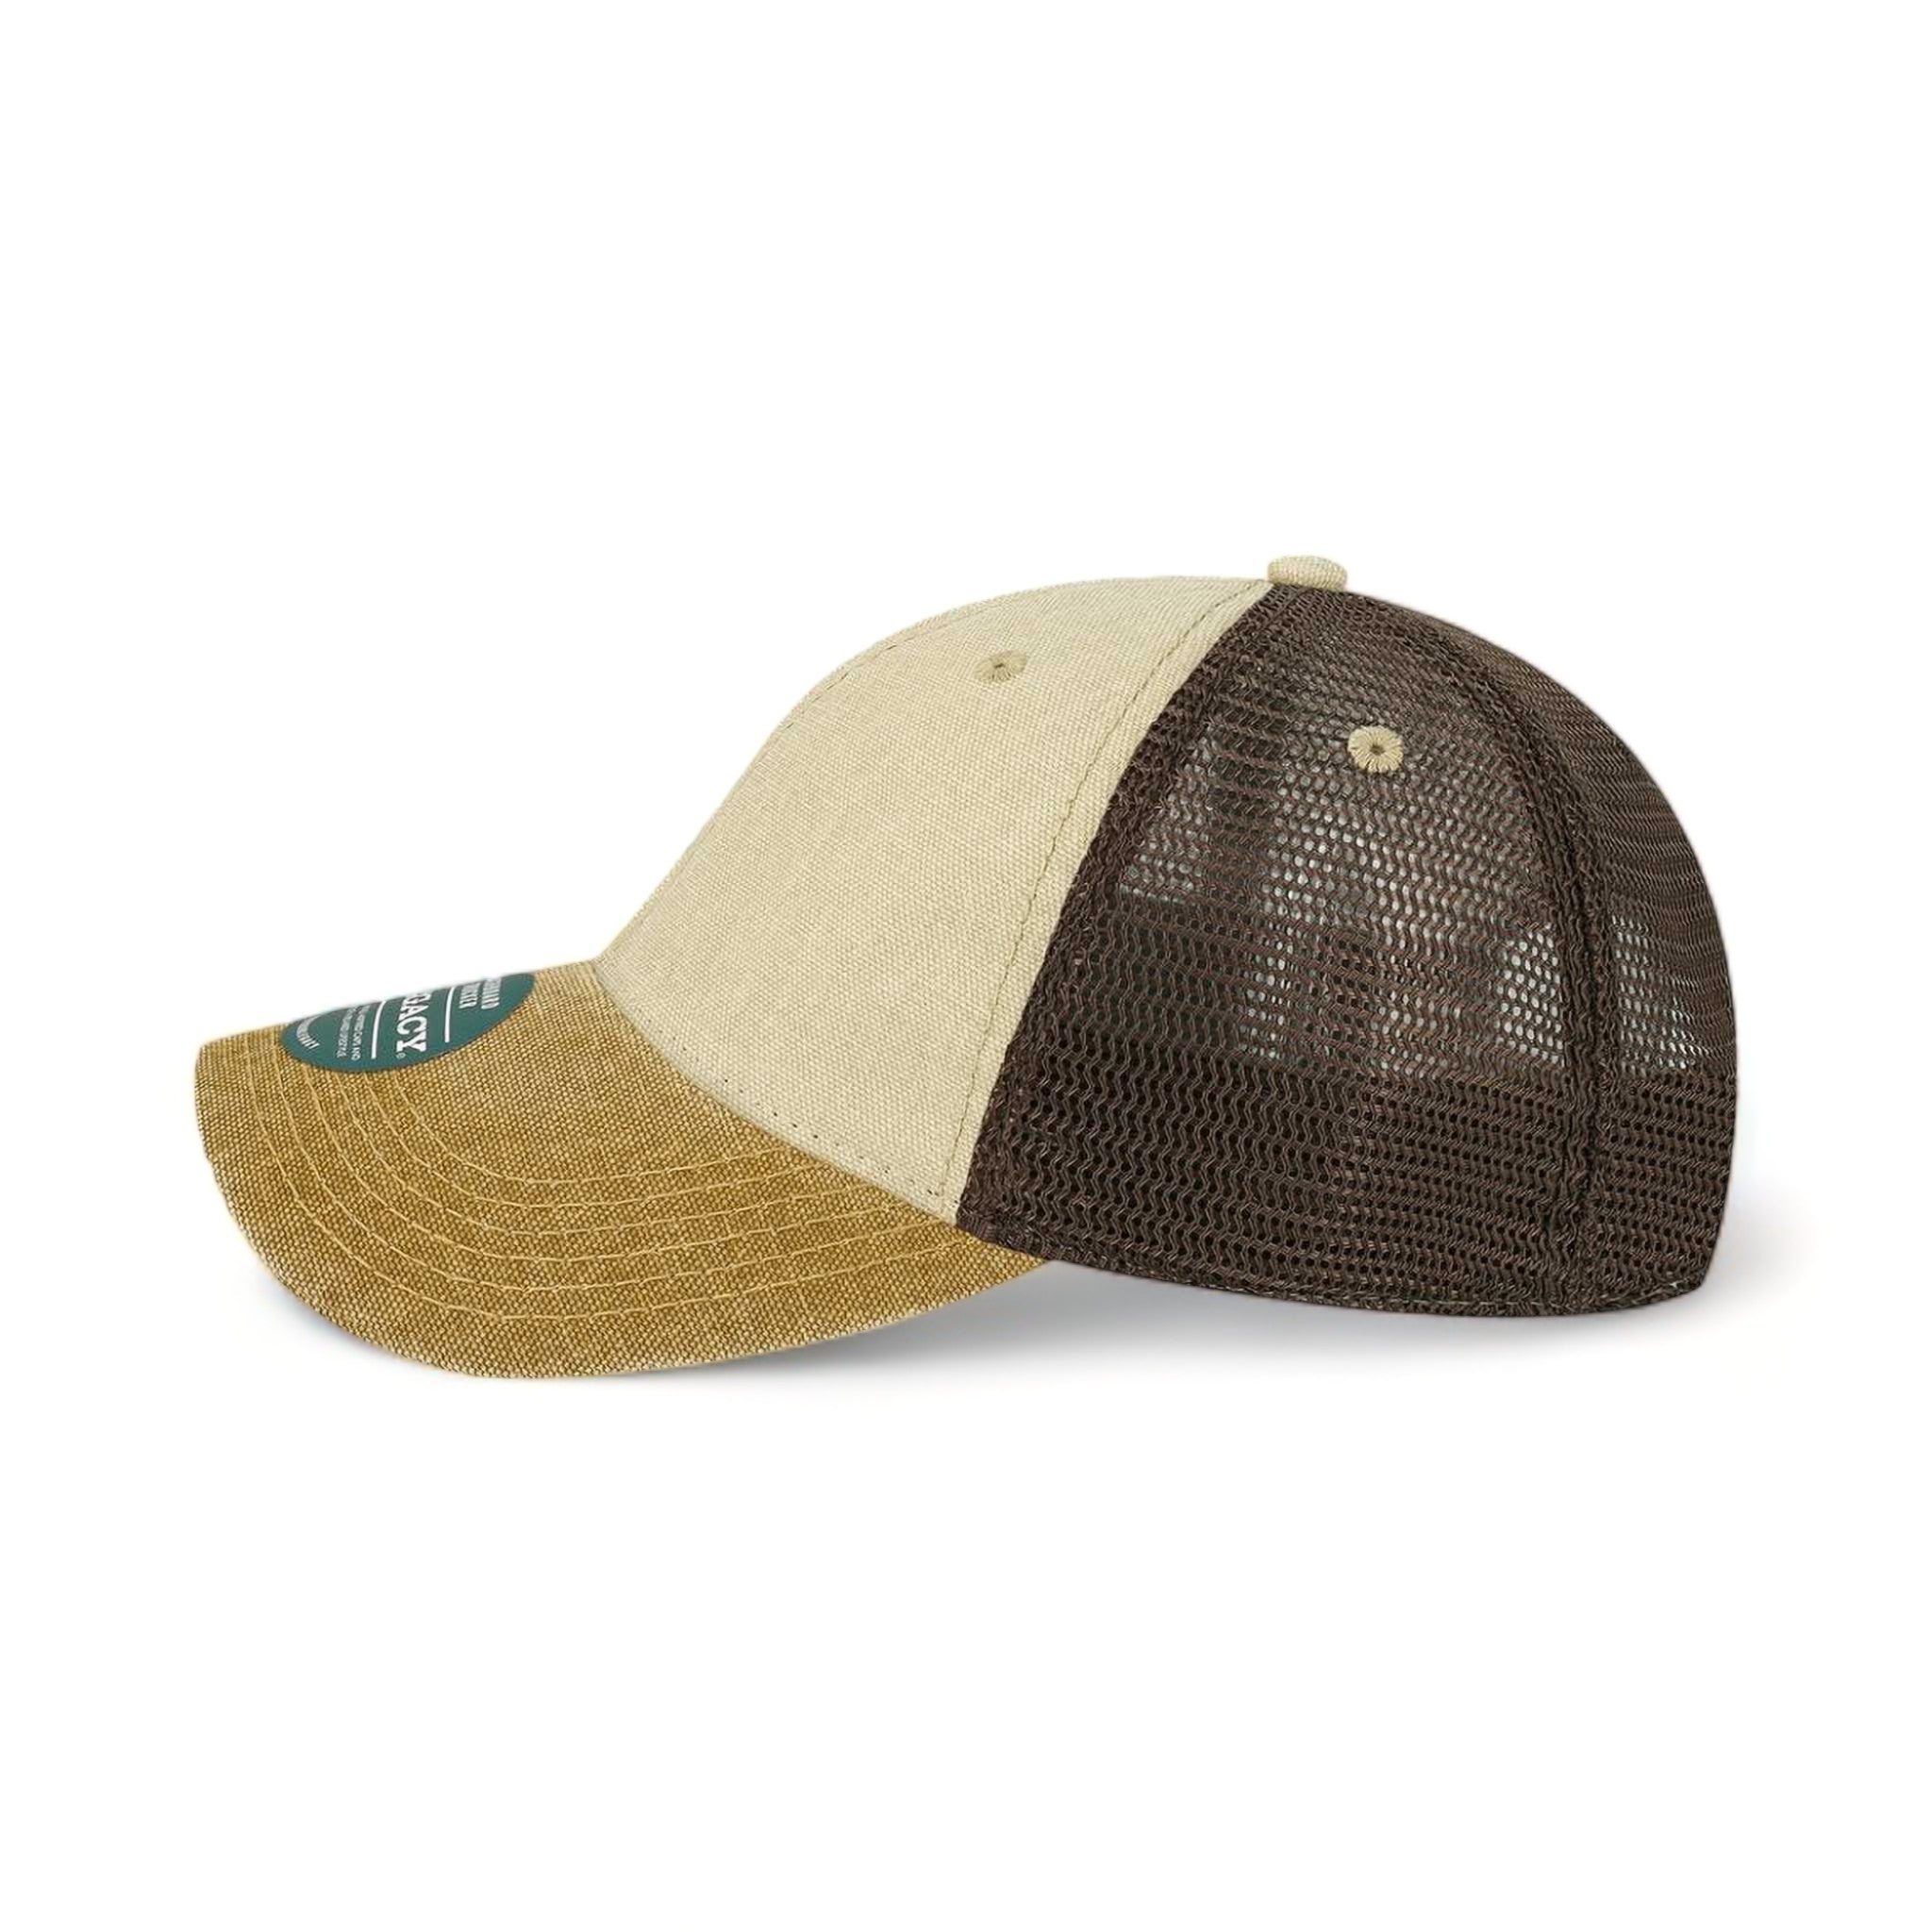 Side view of LEGACY DTA custom hat in stone, camel and brown